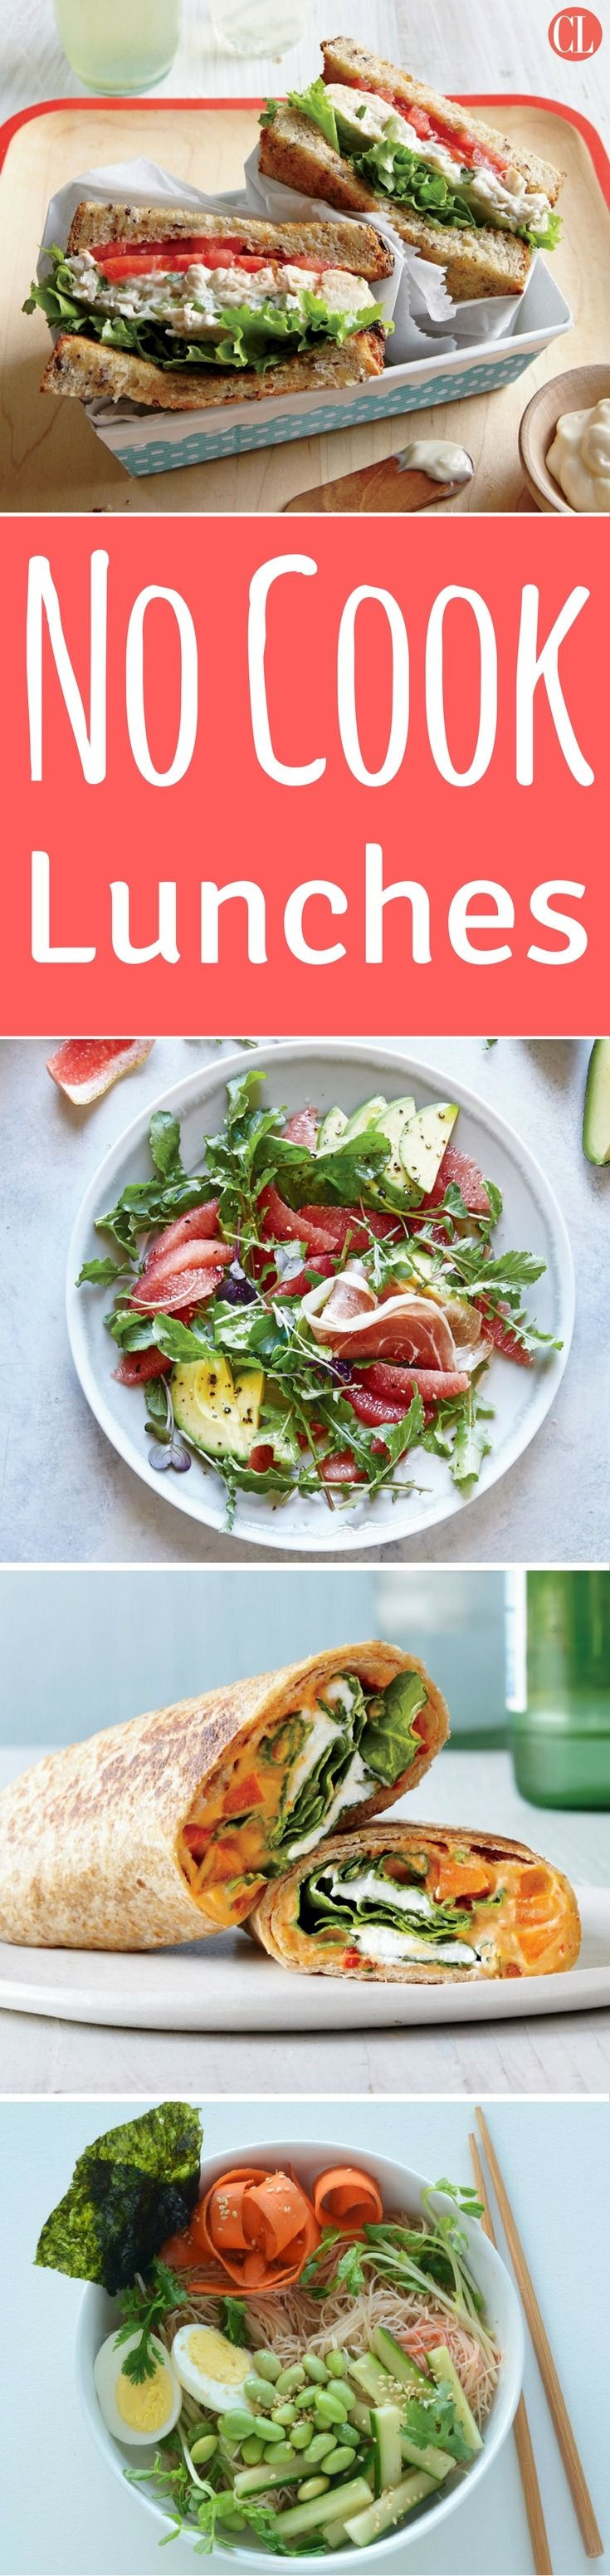 Healthy No Cook Lunches
 63 best No Cook Recipes images on Pinterest